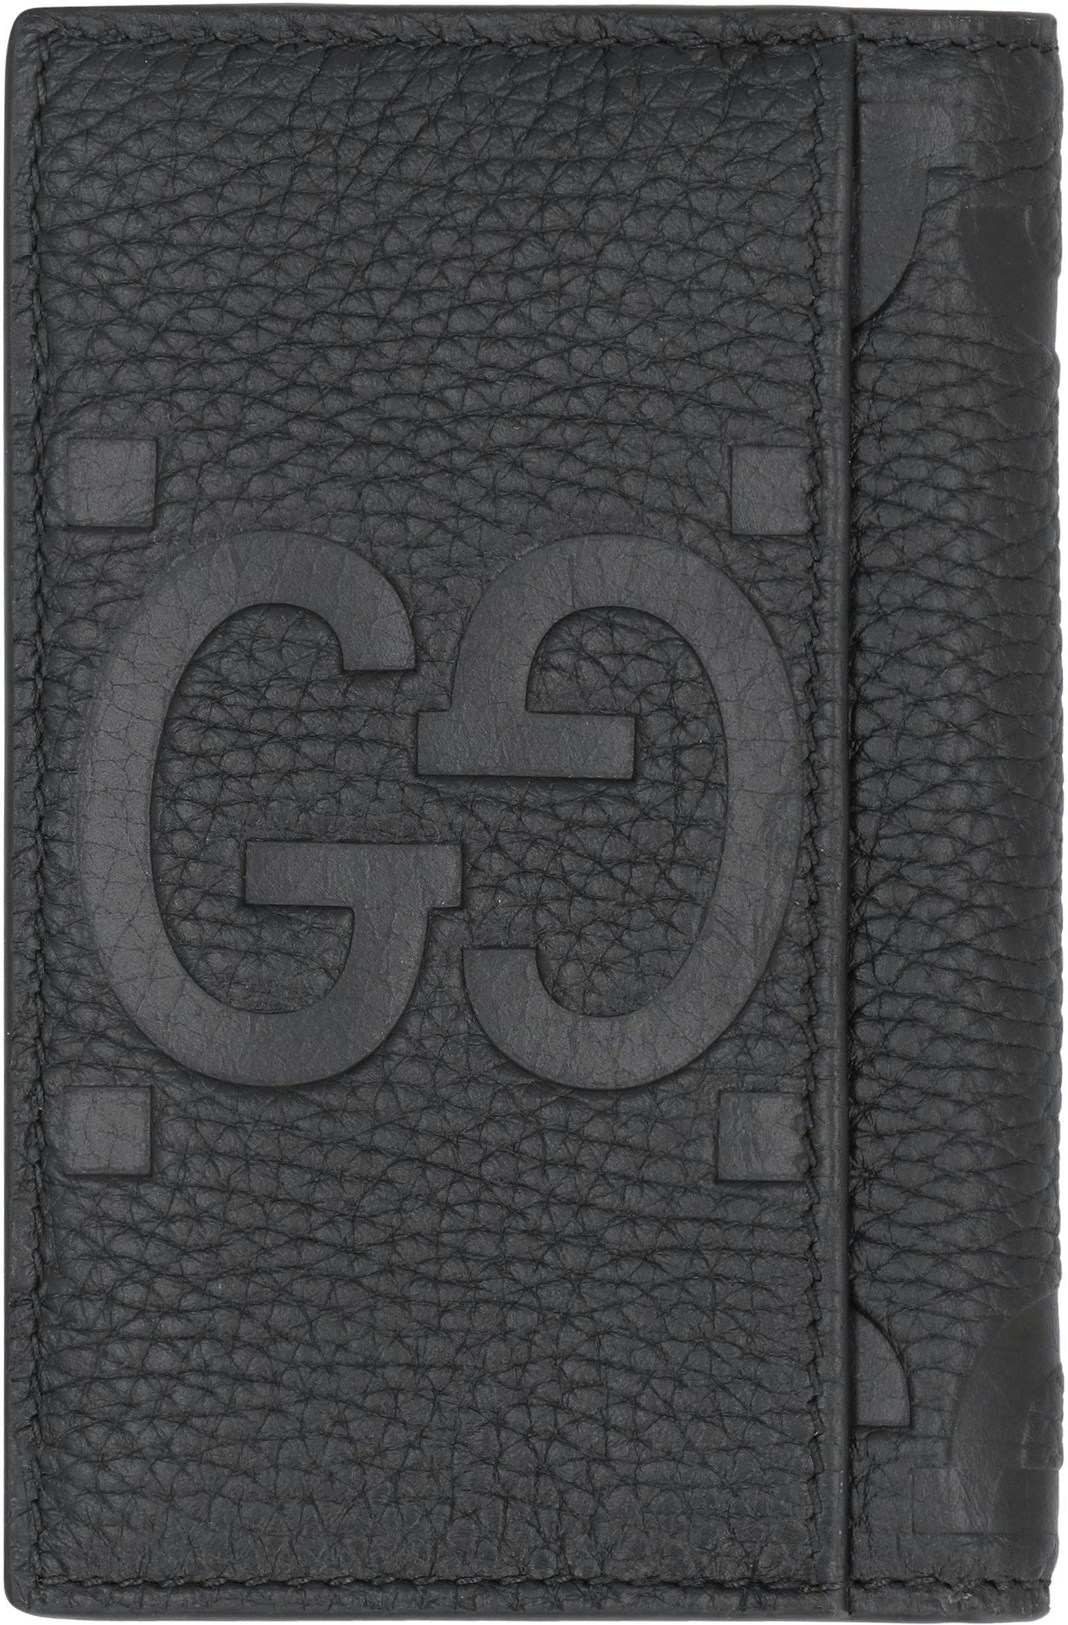 Gucci - GG Embossed Cardholder - Men - Calf Leather - One Size - Black